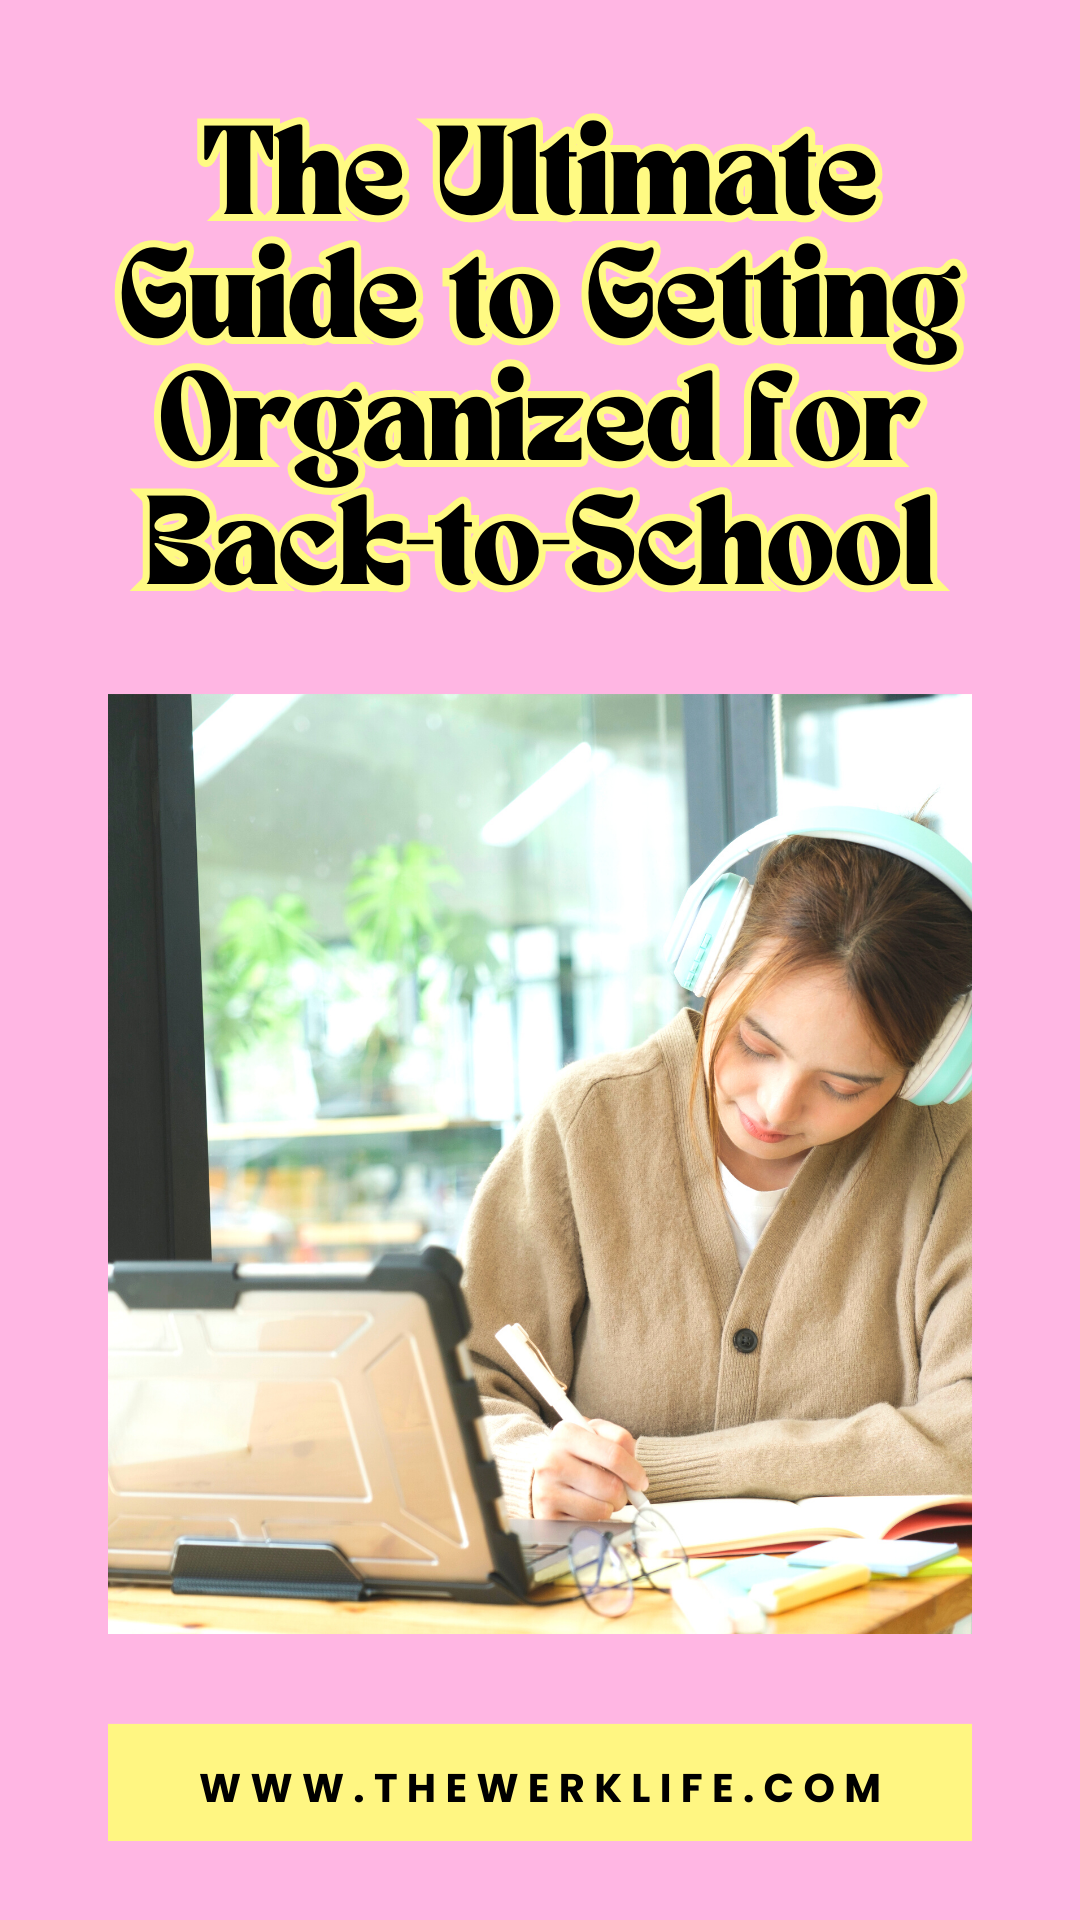 The Ultimate Guide to Getting Organized for Back-to-School